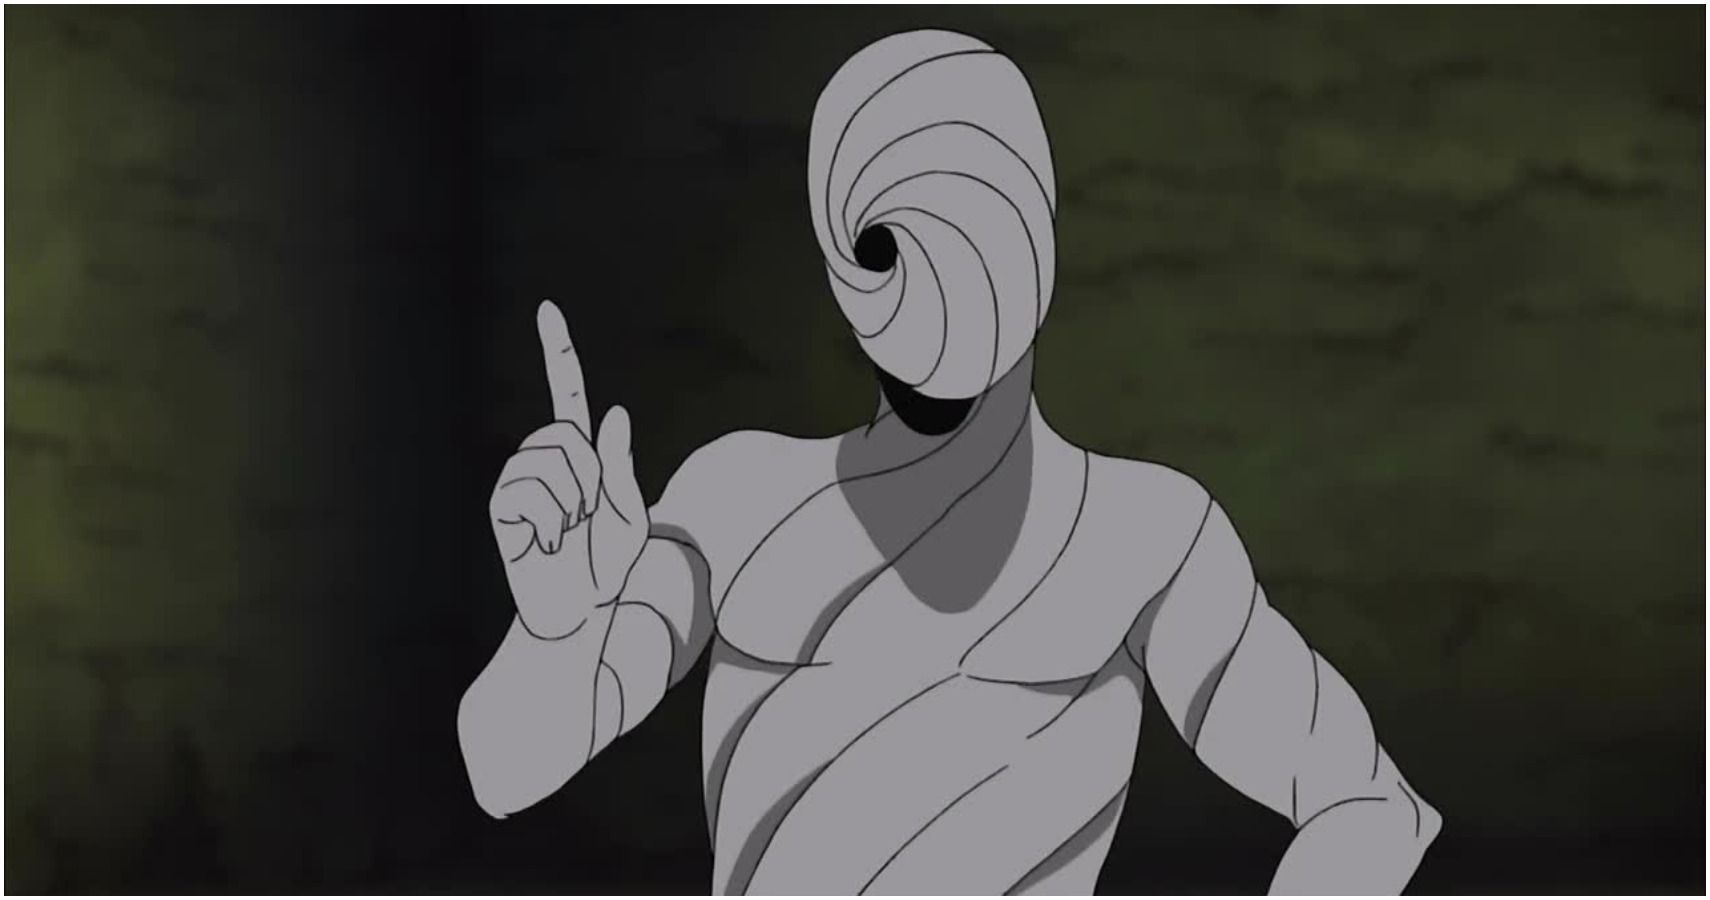 tobi from naruto standing with one finger pointed up